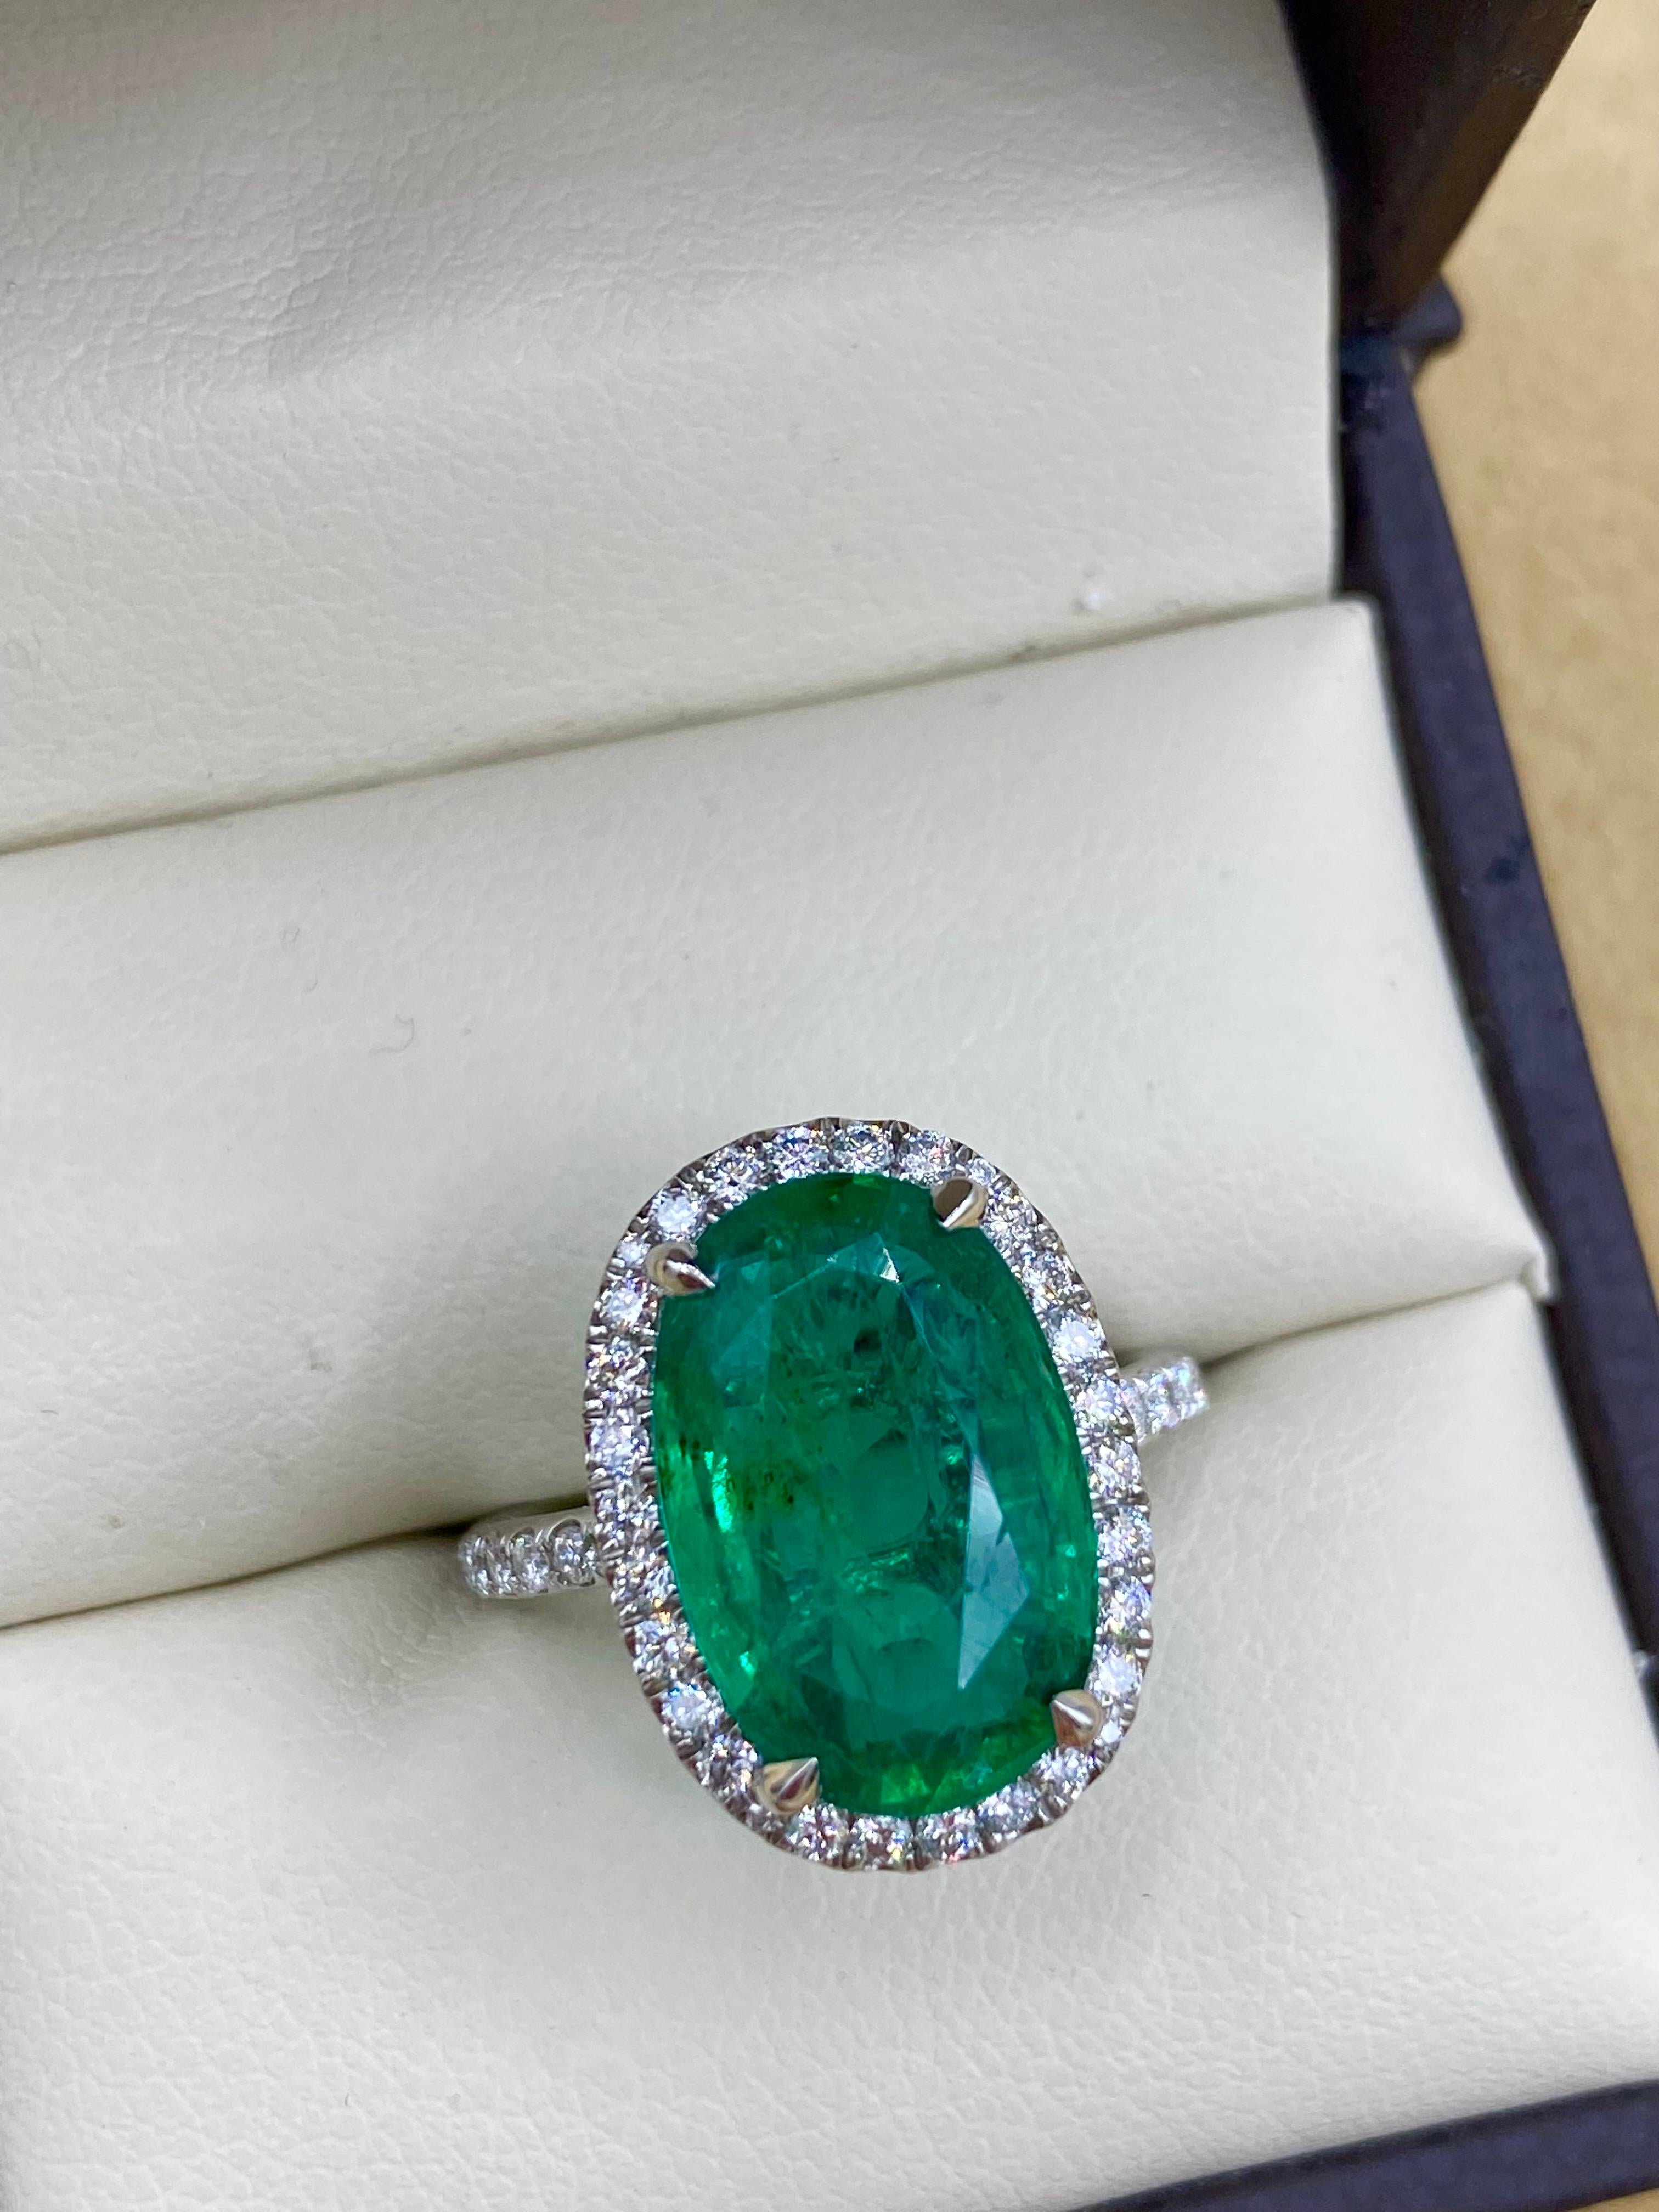 From the vault at Emilio Jewelry located on New York's iconic Fifth Avenue,
A very special and unique 5.62 carat Zambian emerald serves as the focal point of this ring. What makes this ring really special is the unique elongated cushion shape and